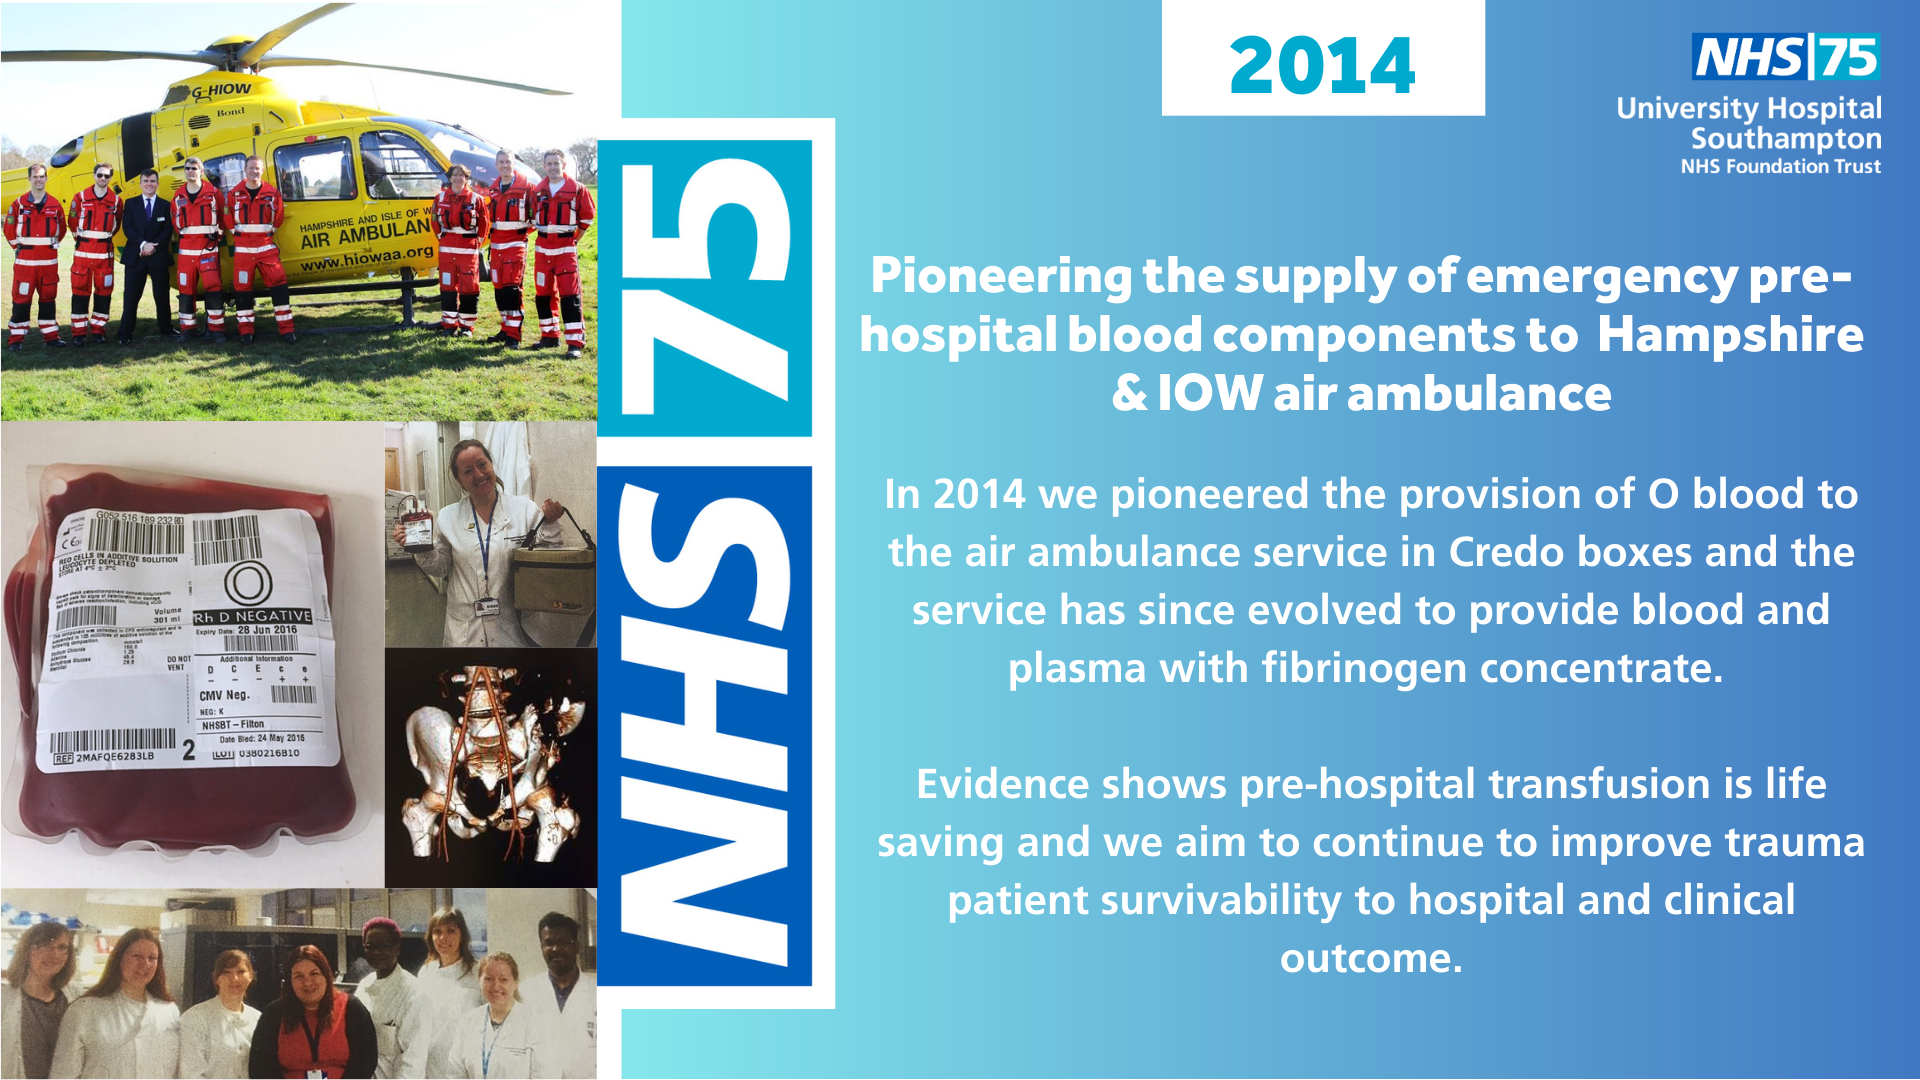 Pioneering the supply of emergency pre-hospital blood components to Hampshire and IOW air ambulance